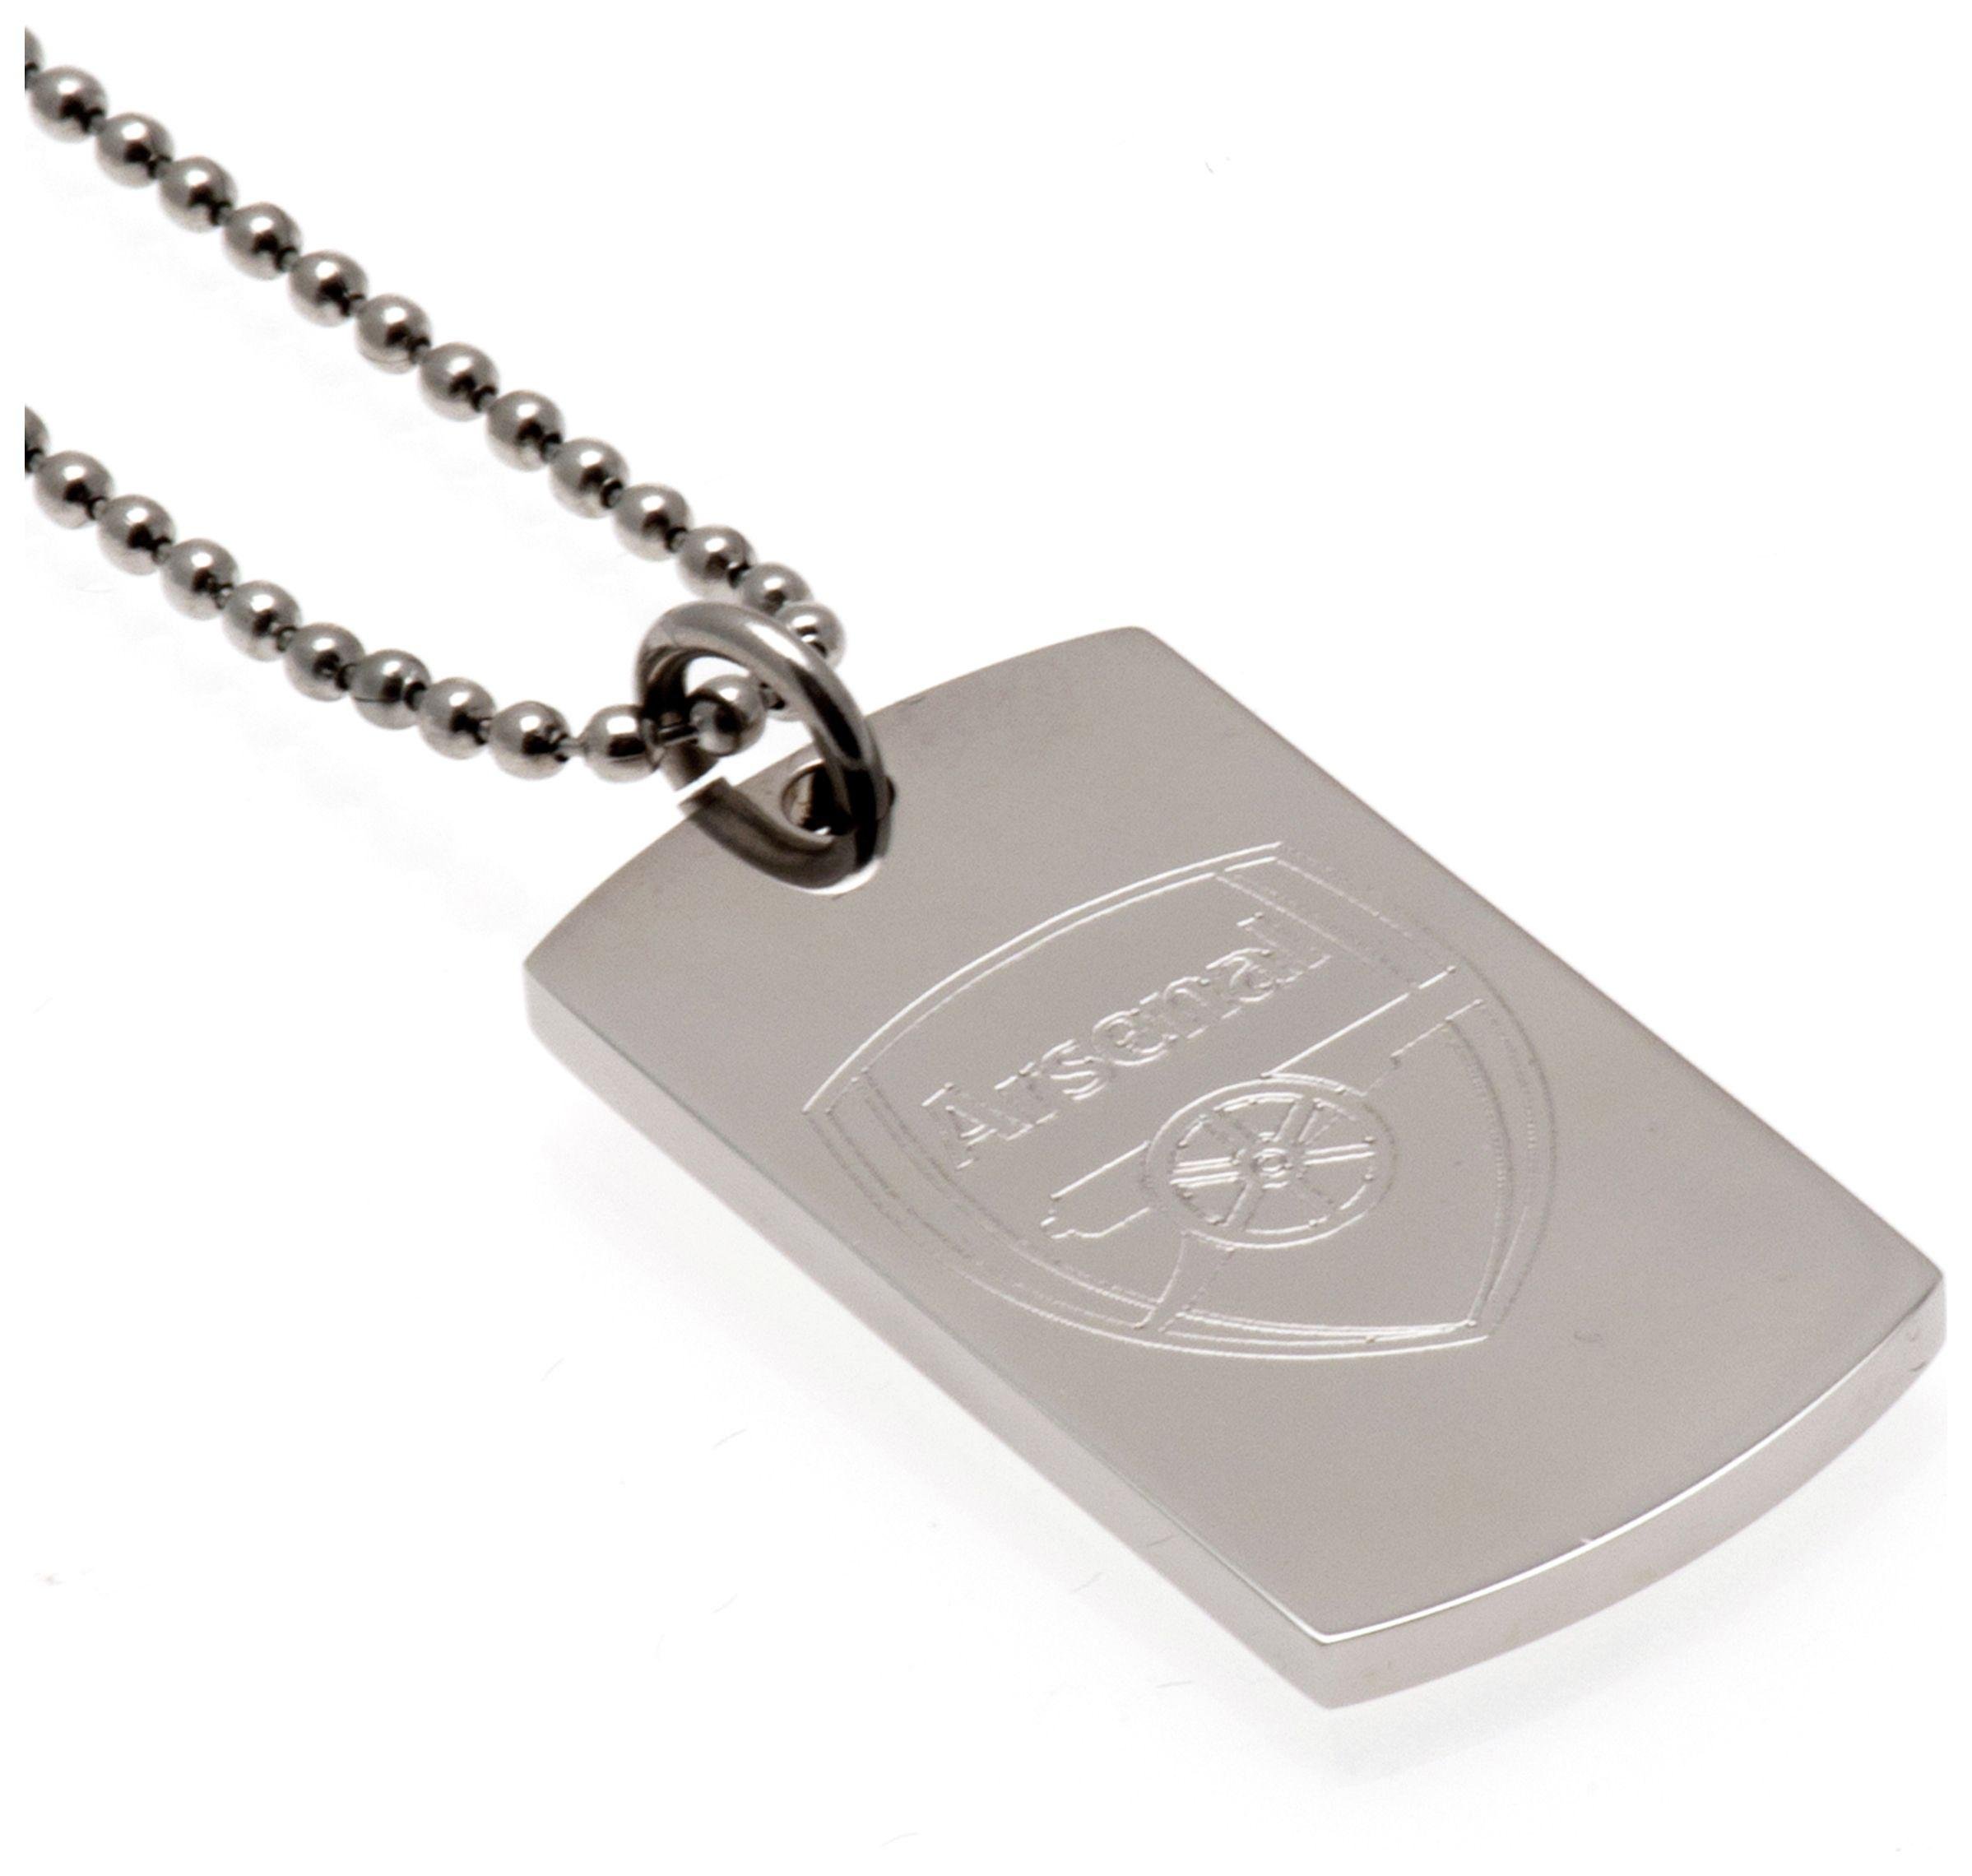 Stainless Steel Arsenal Dogtag and Chain.